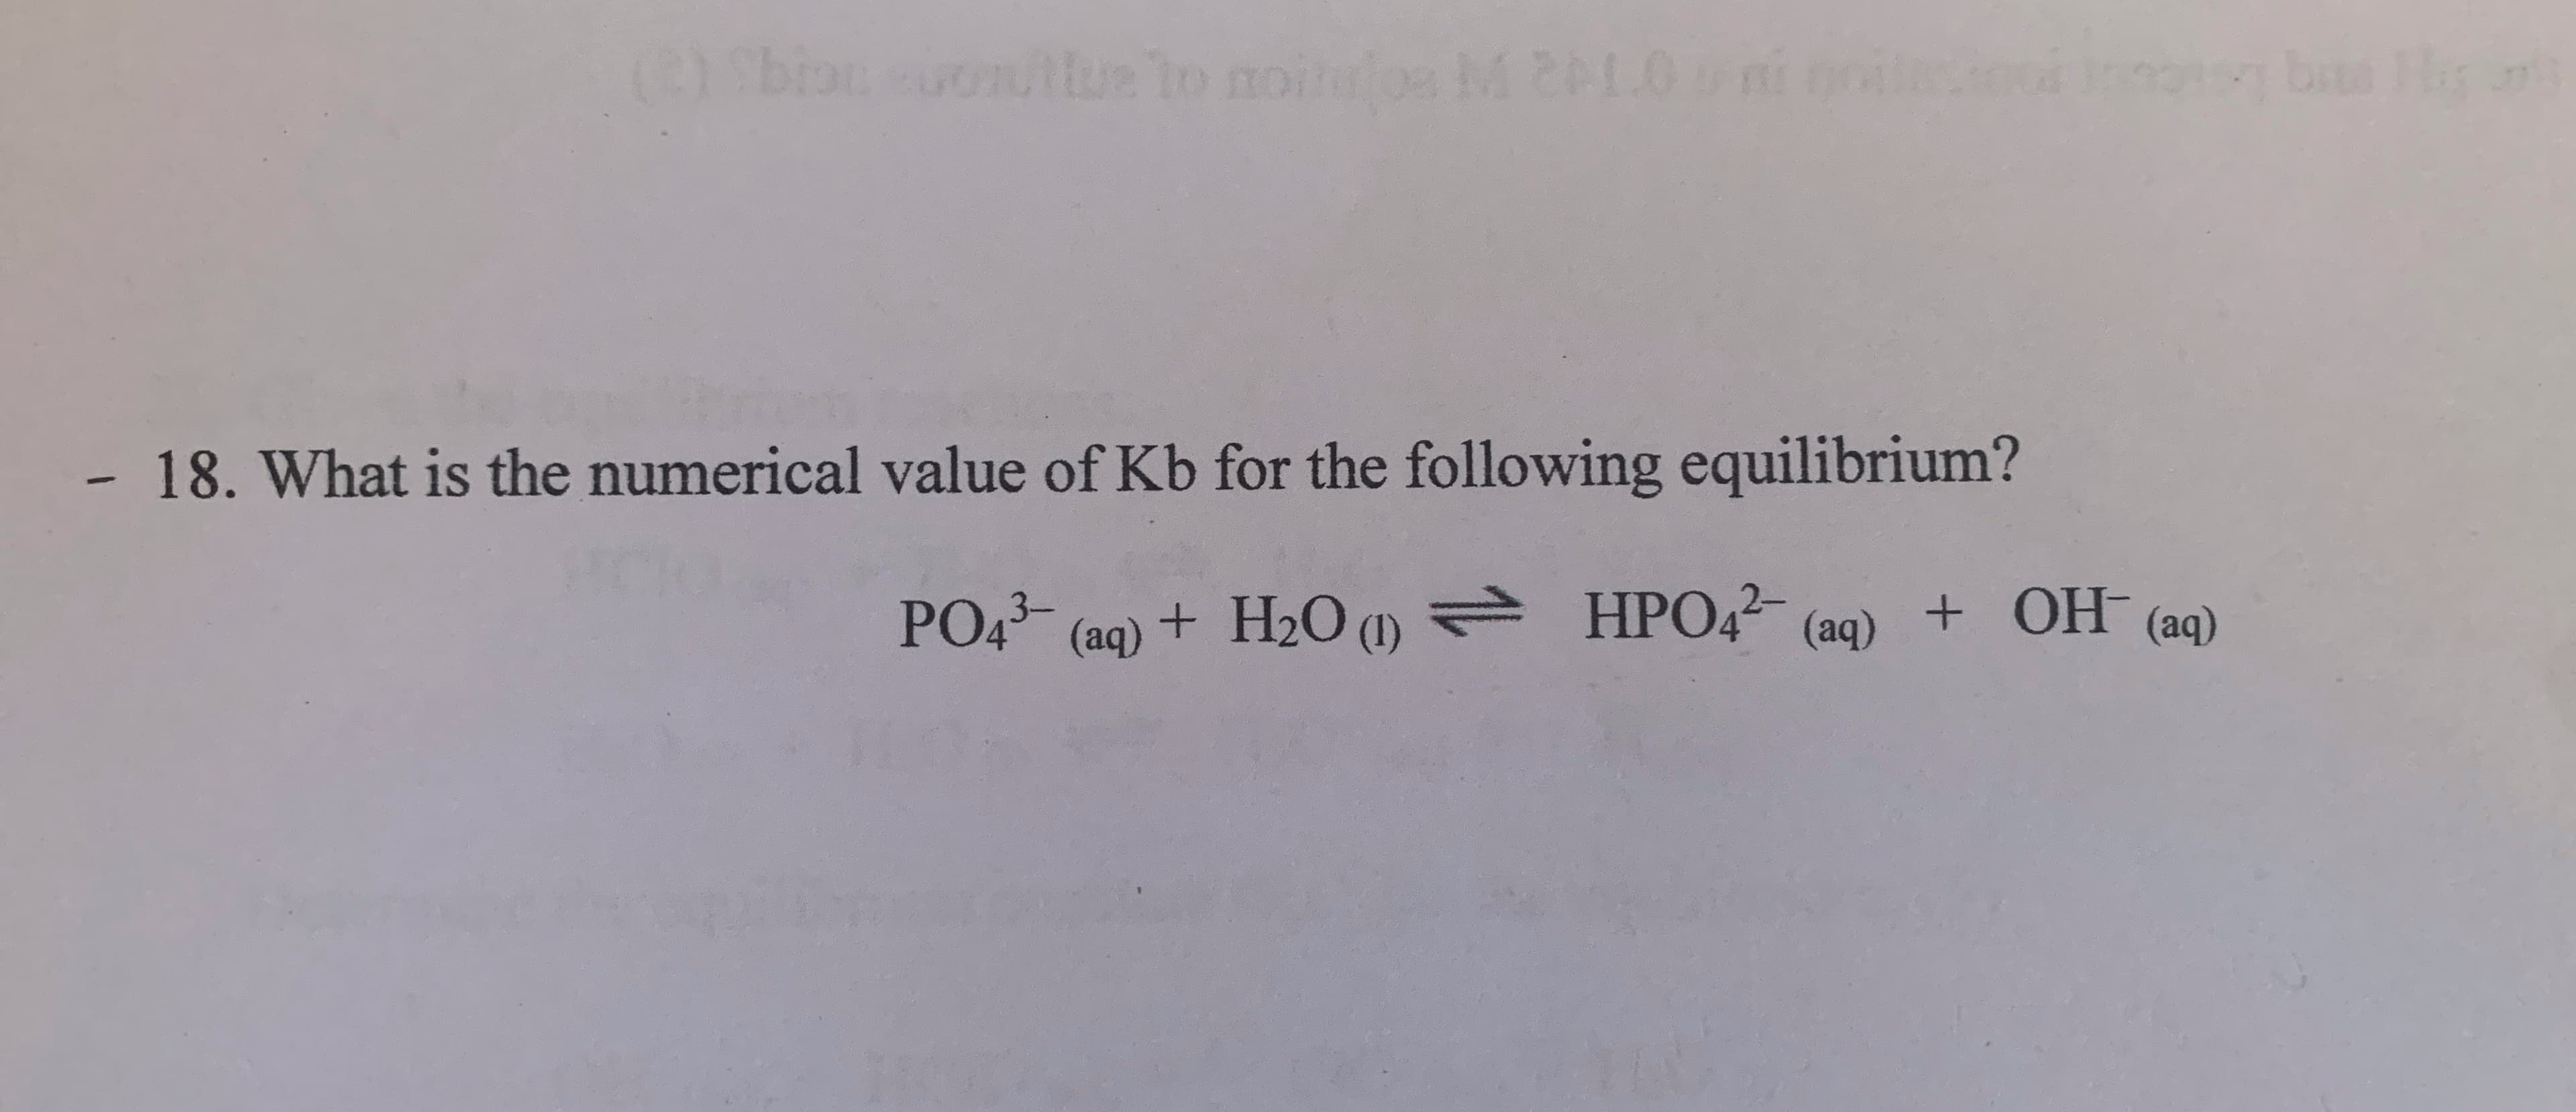 18. What is the numerical value of Kb for the following equilibrium?
PO43- (aq) + H2O) HPO4²- (aq) + OH (aq)
+ H2O (1)
e HPO42
